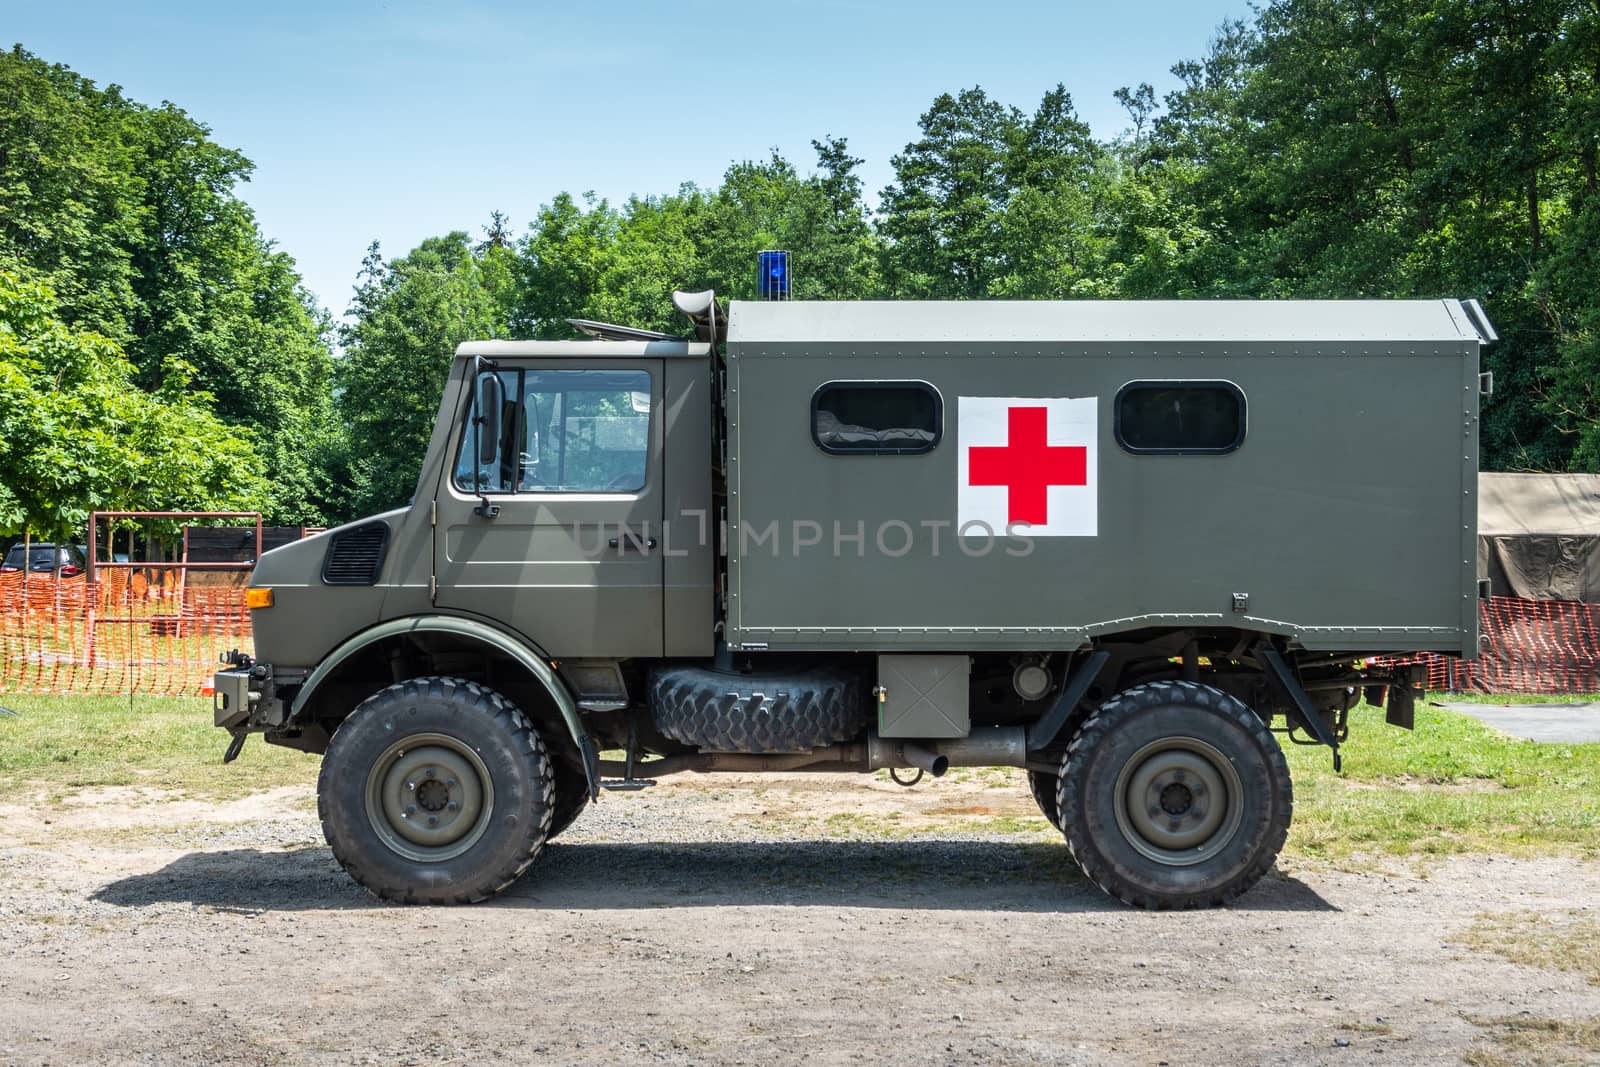 Han-sur-Lesse, Belgium - June 25, 2019: Belgian army green ambulance truck with red cross symbol against green foliage and light blue sky.